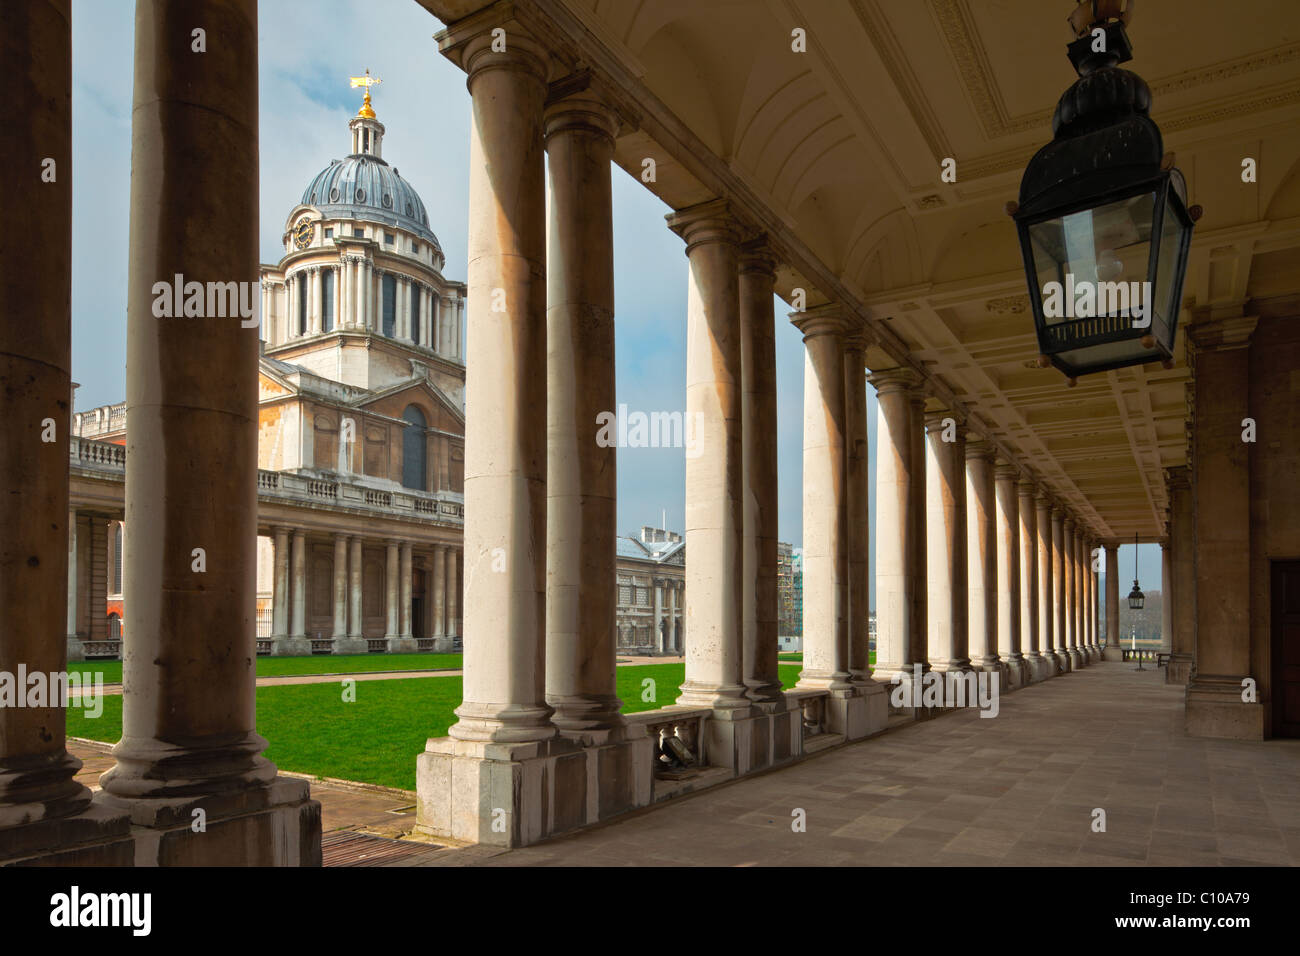 Old Royal Naval College, Greenwich. Stockfoto